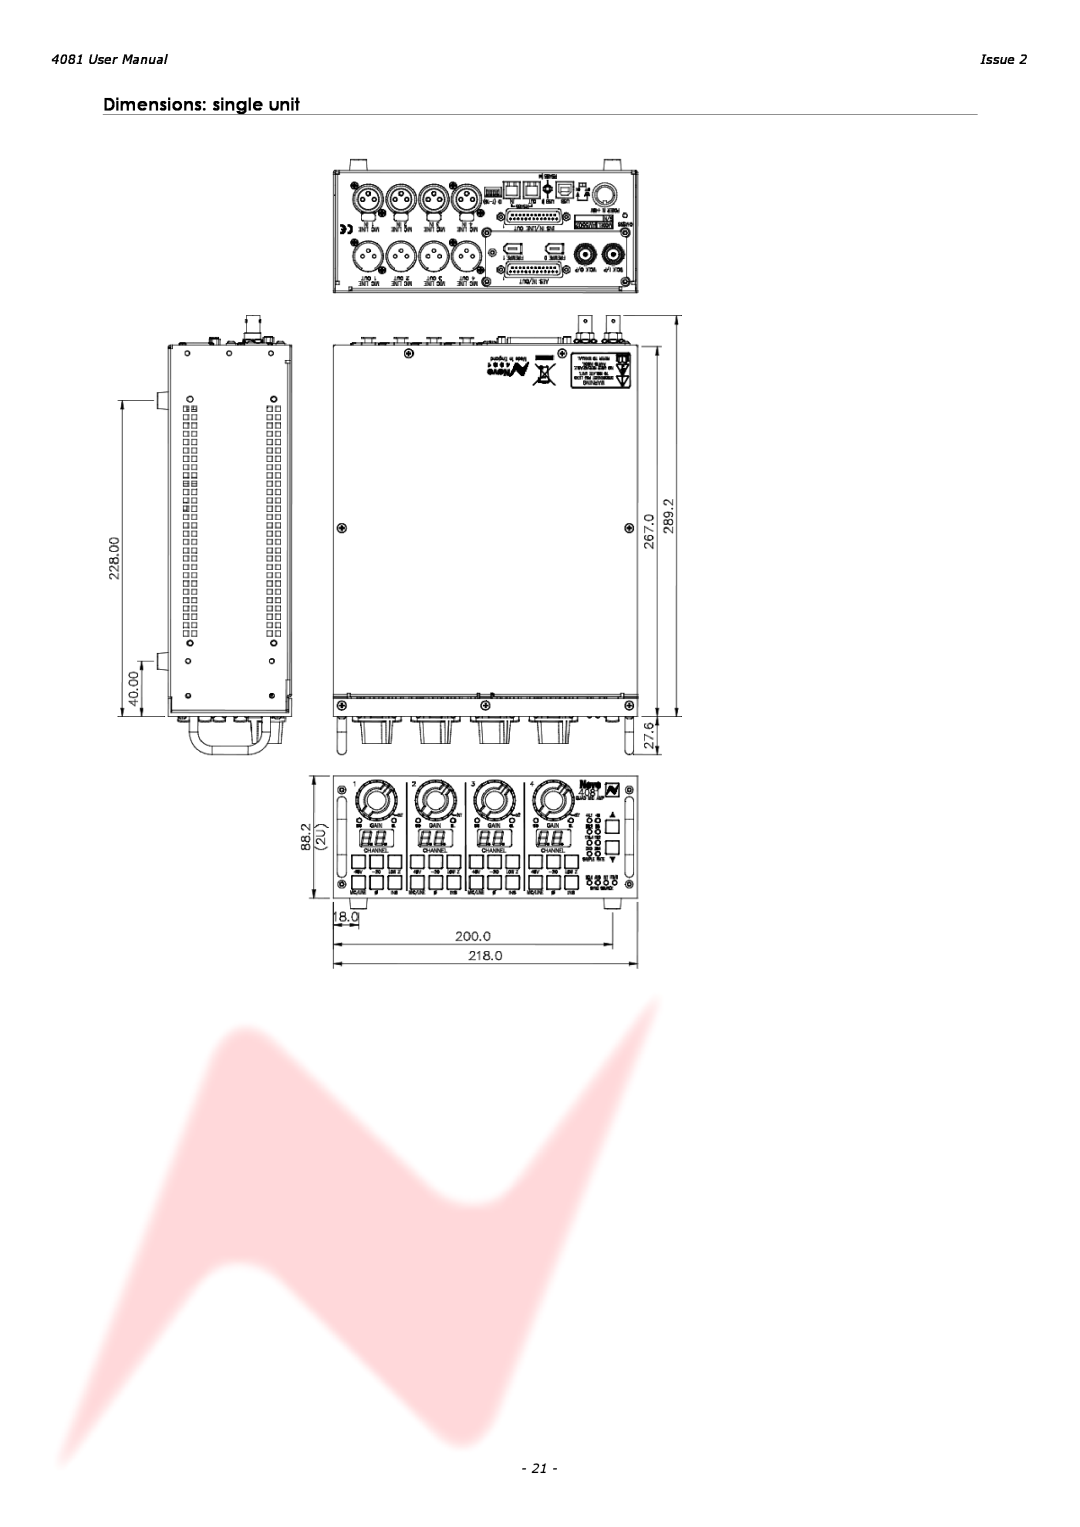 AMS 4081 user manual Dimensions single unit, Issue 